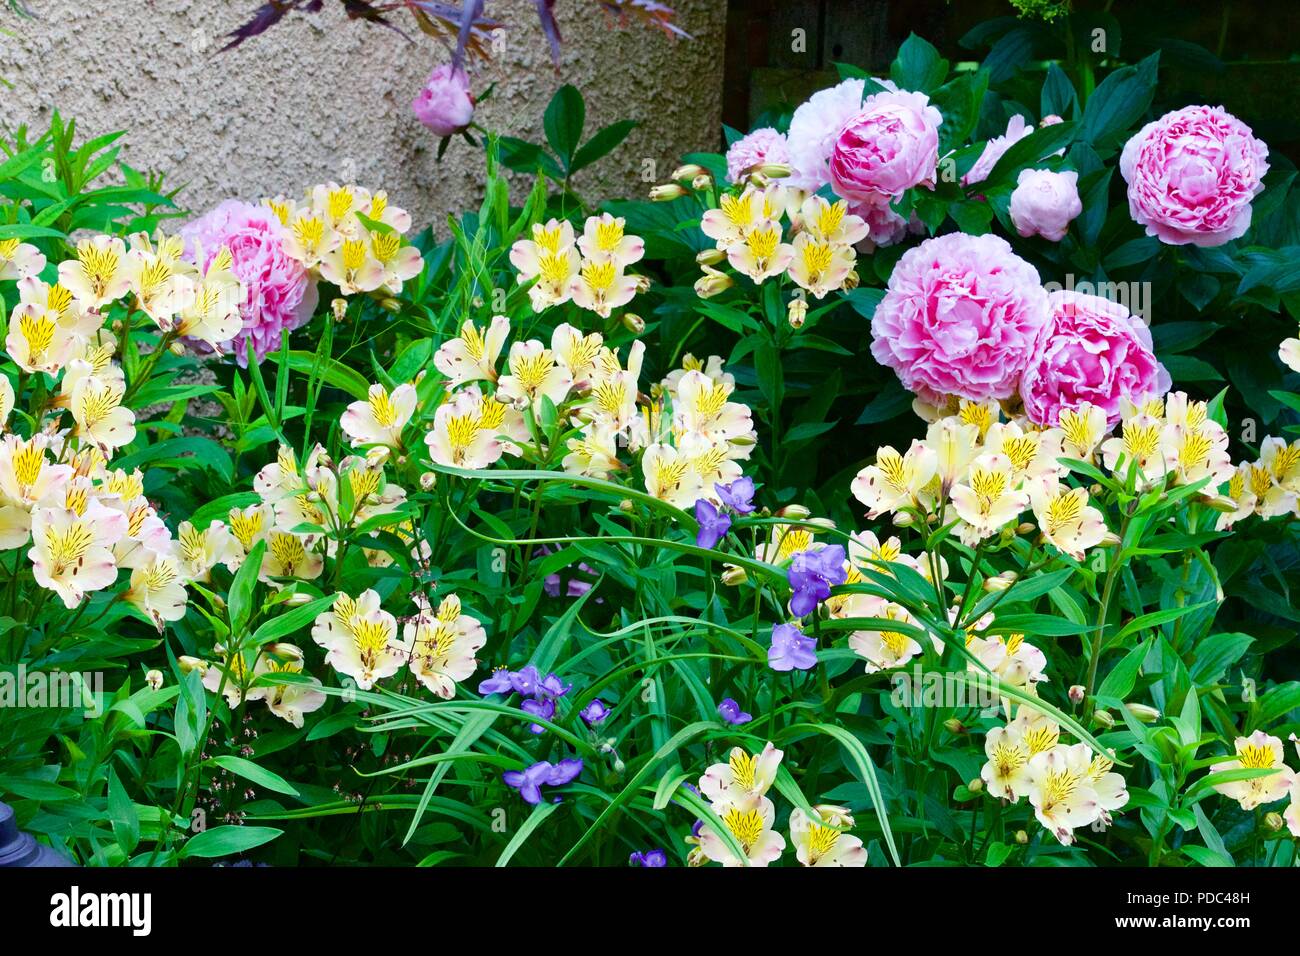 A beautiful summer display of Alstroemeria, Tradescantia and Peonies Stock Photo